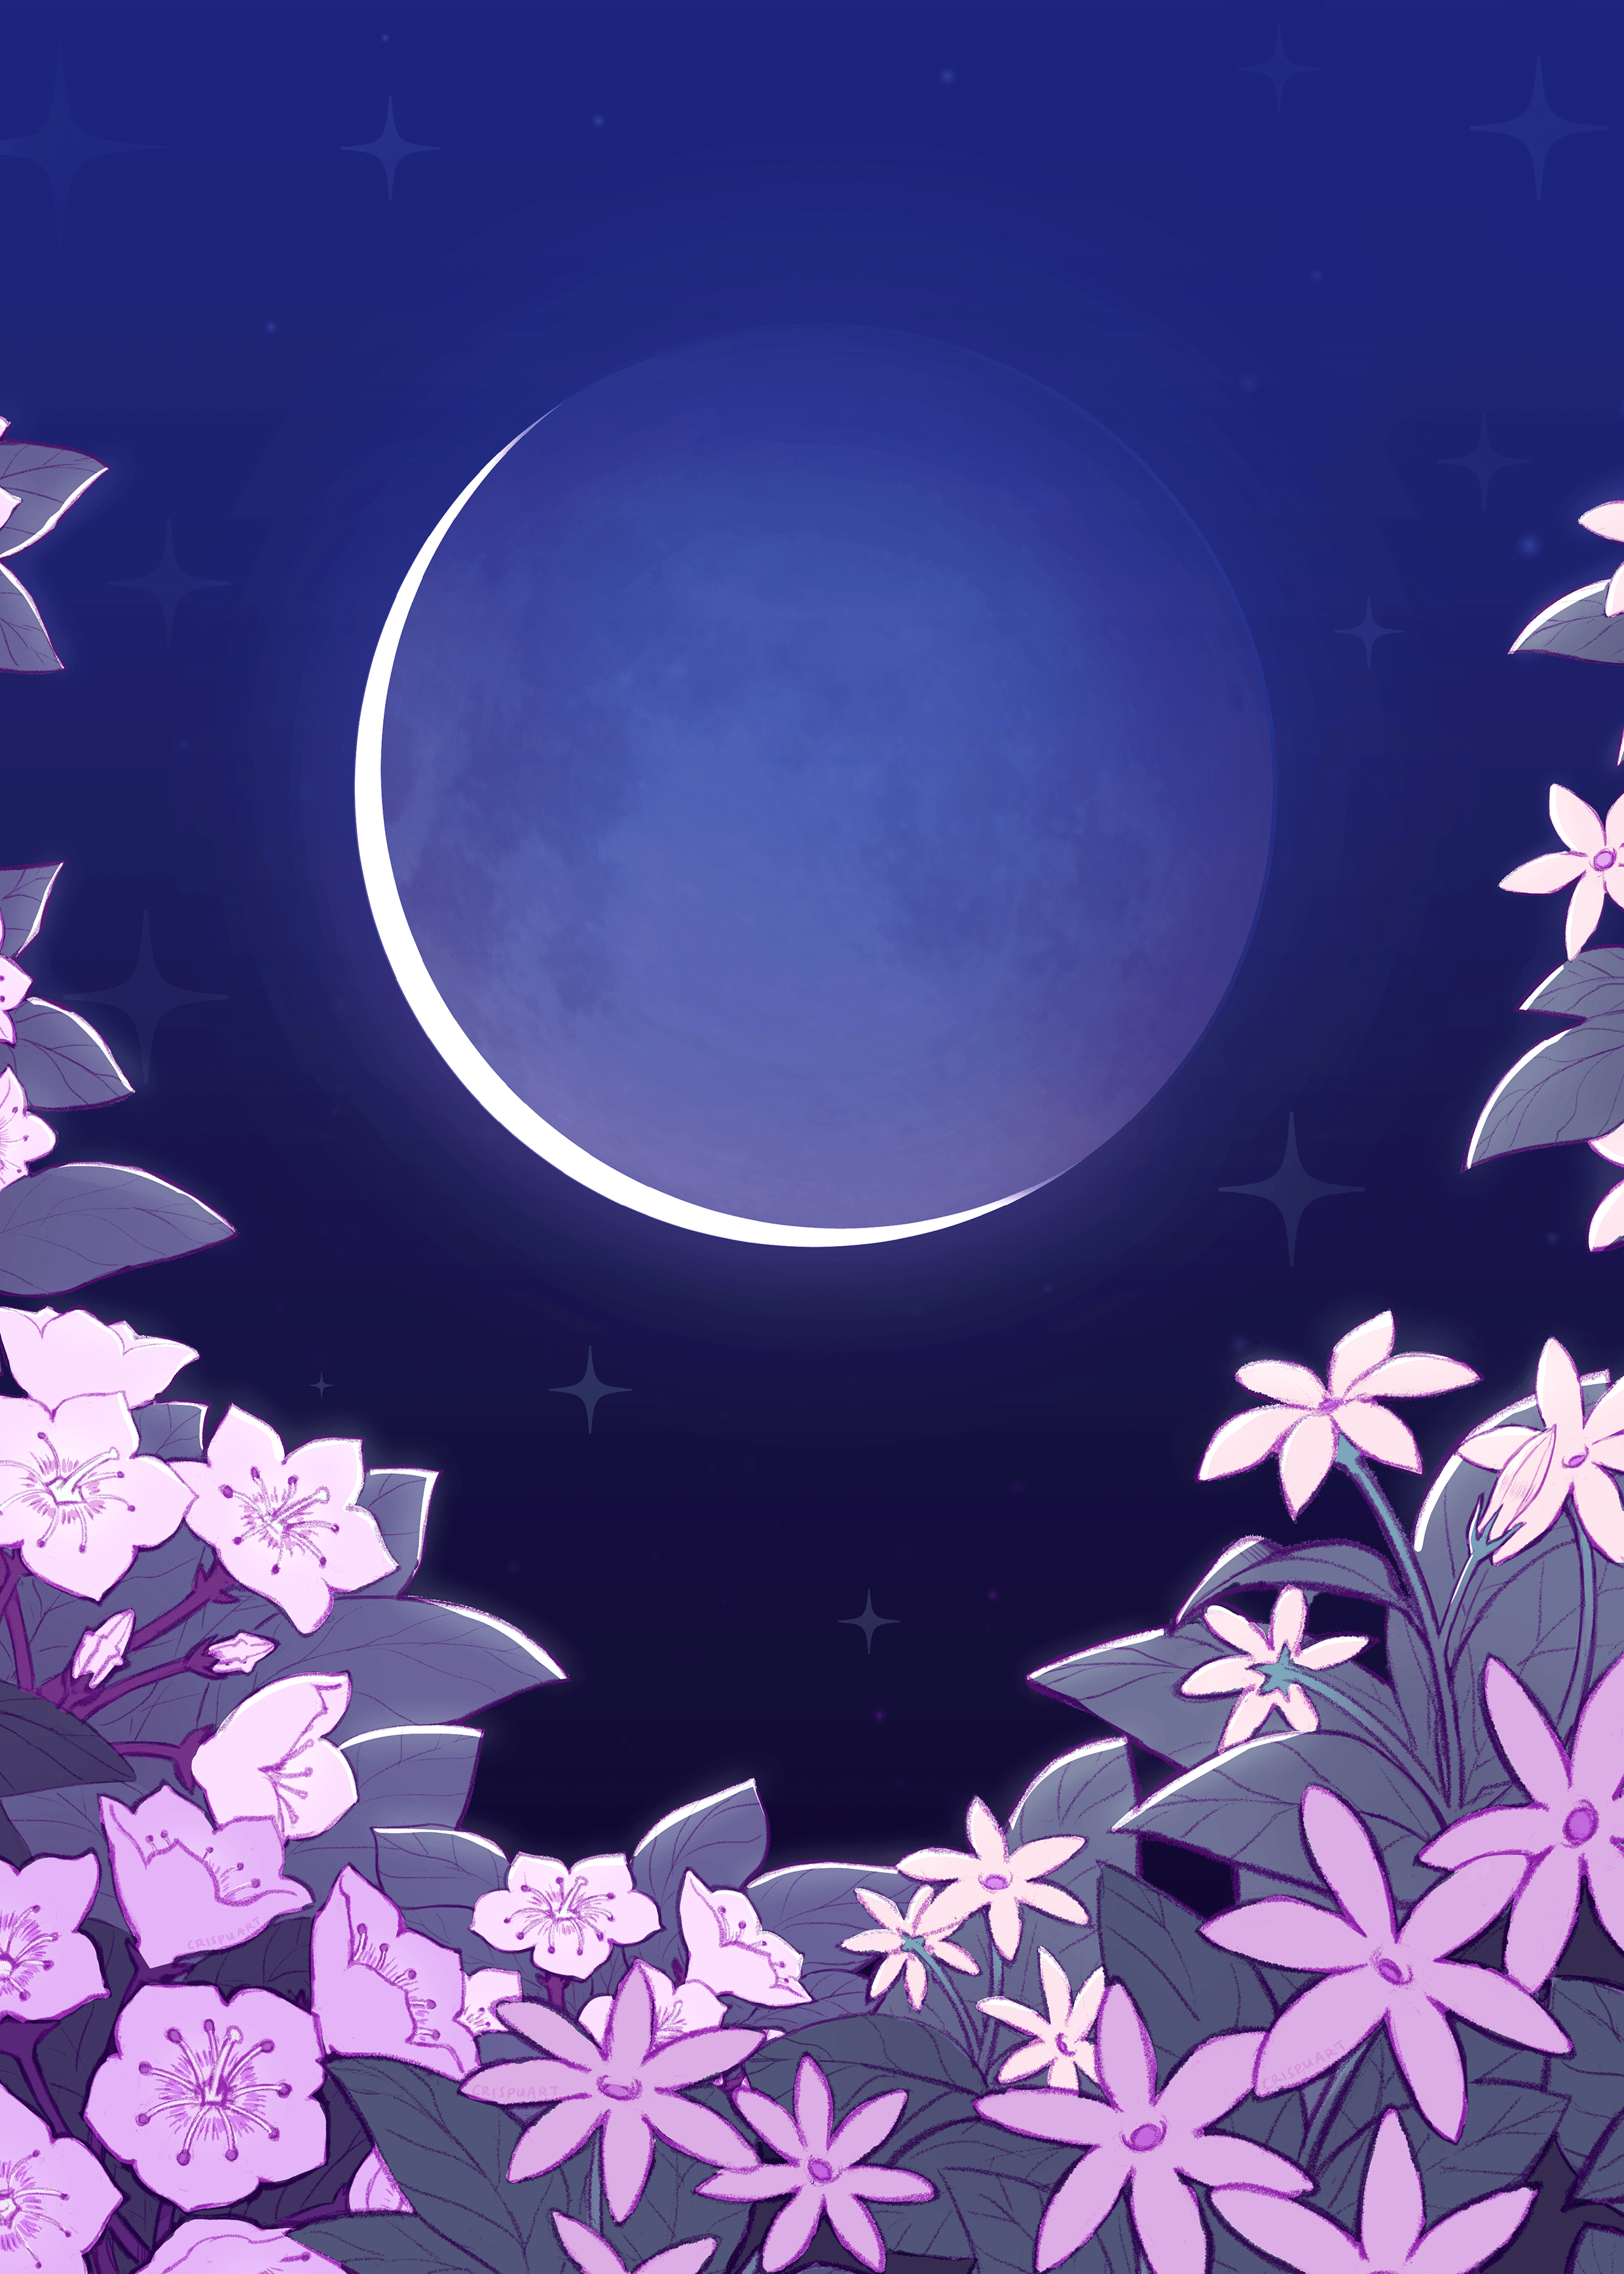 waxing cresent moon with flowers